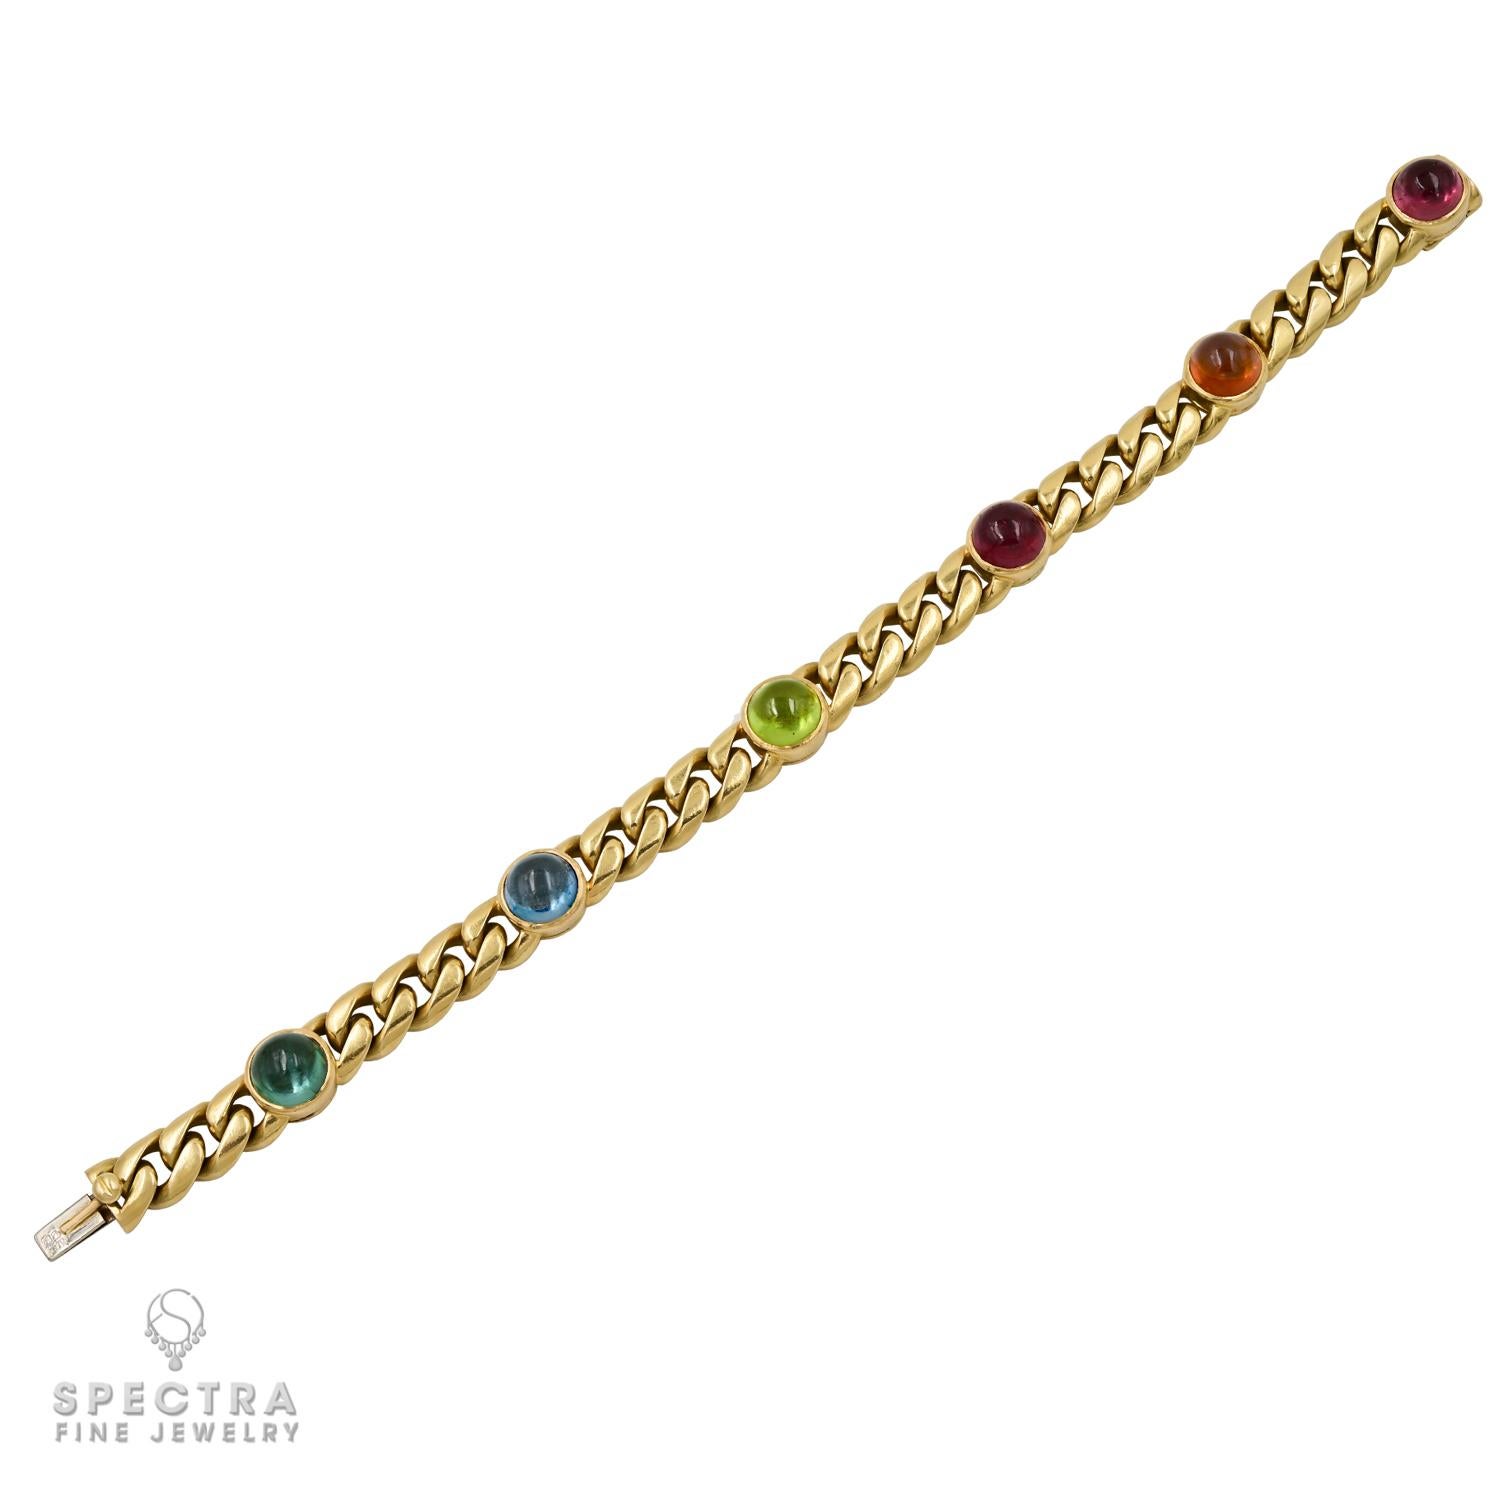 The Bulgari Gemstone 18k yellow gold Vintage Chain Bracelet is a remarkable piece of jewelry showcasing exquisite craftsmanship and materials. Created in the 1990s, this bracelet boasts a design that remains timeless and elegant to this day. Crafted